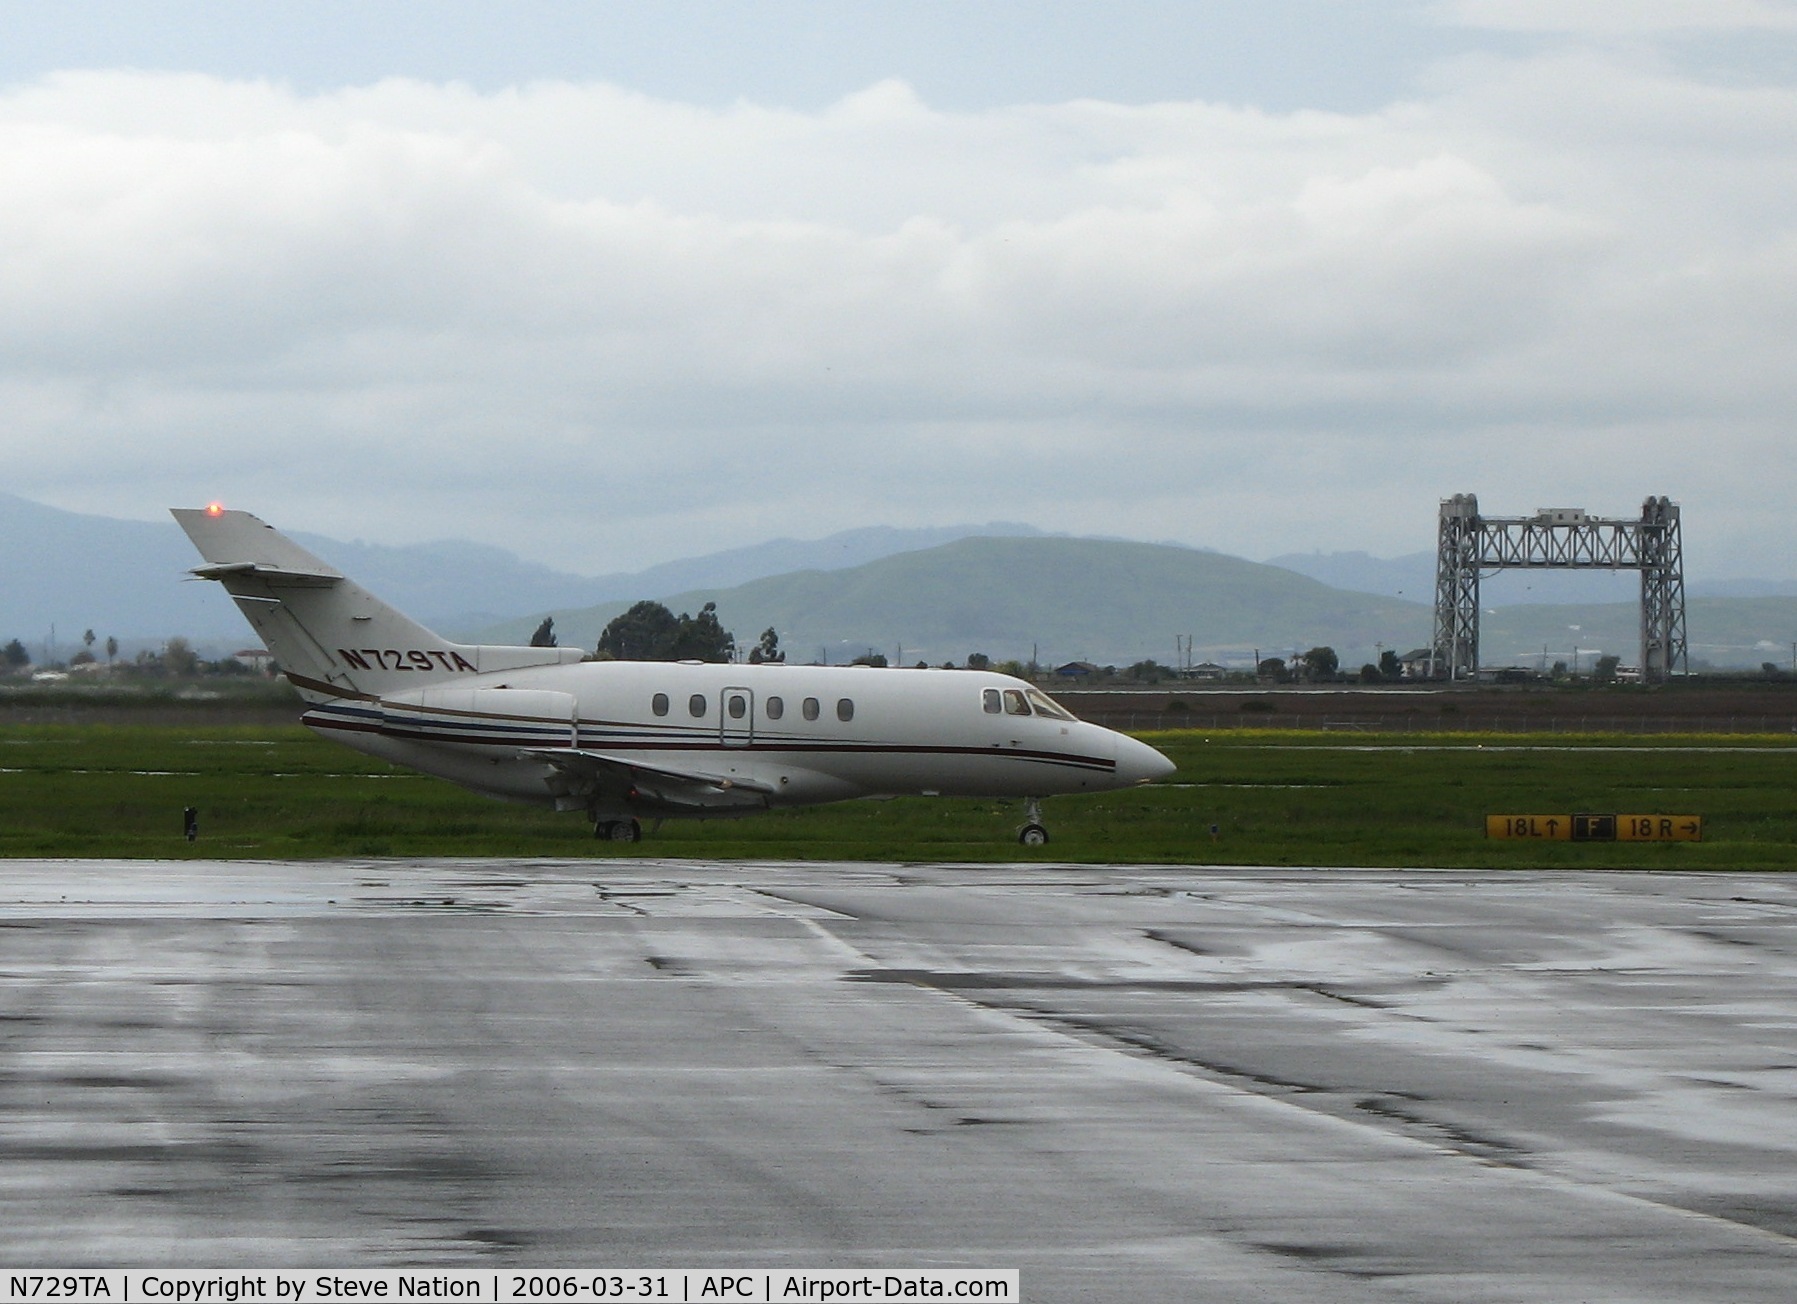 N729TA, 1983 Cessna 550 Citation II C/N 550-0483, Taxying for take-off @ Napa County Airport, CA